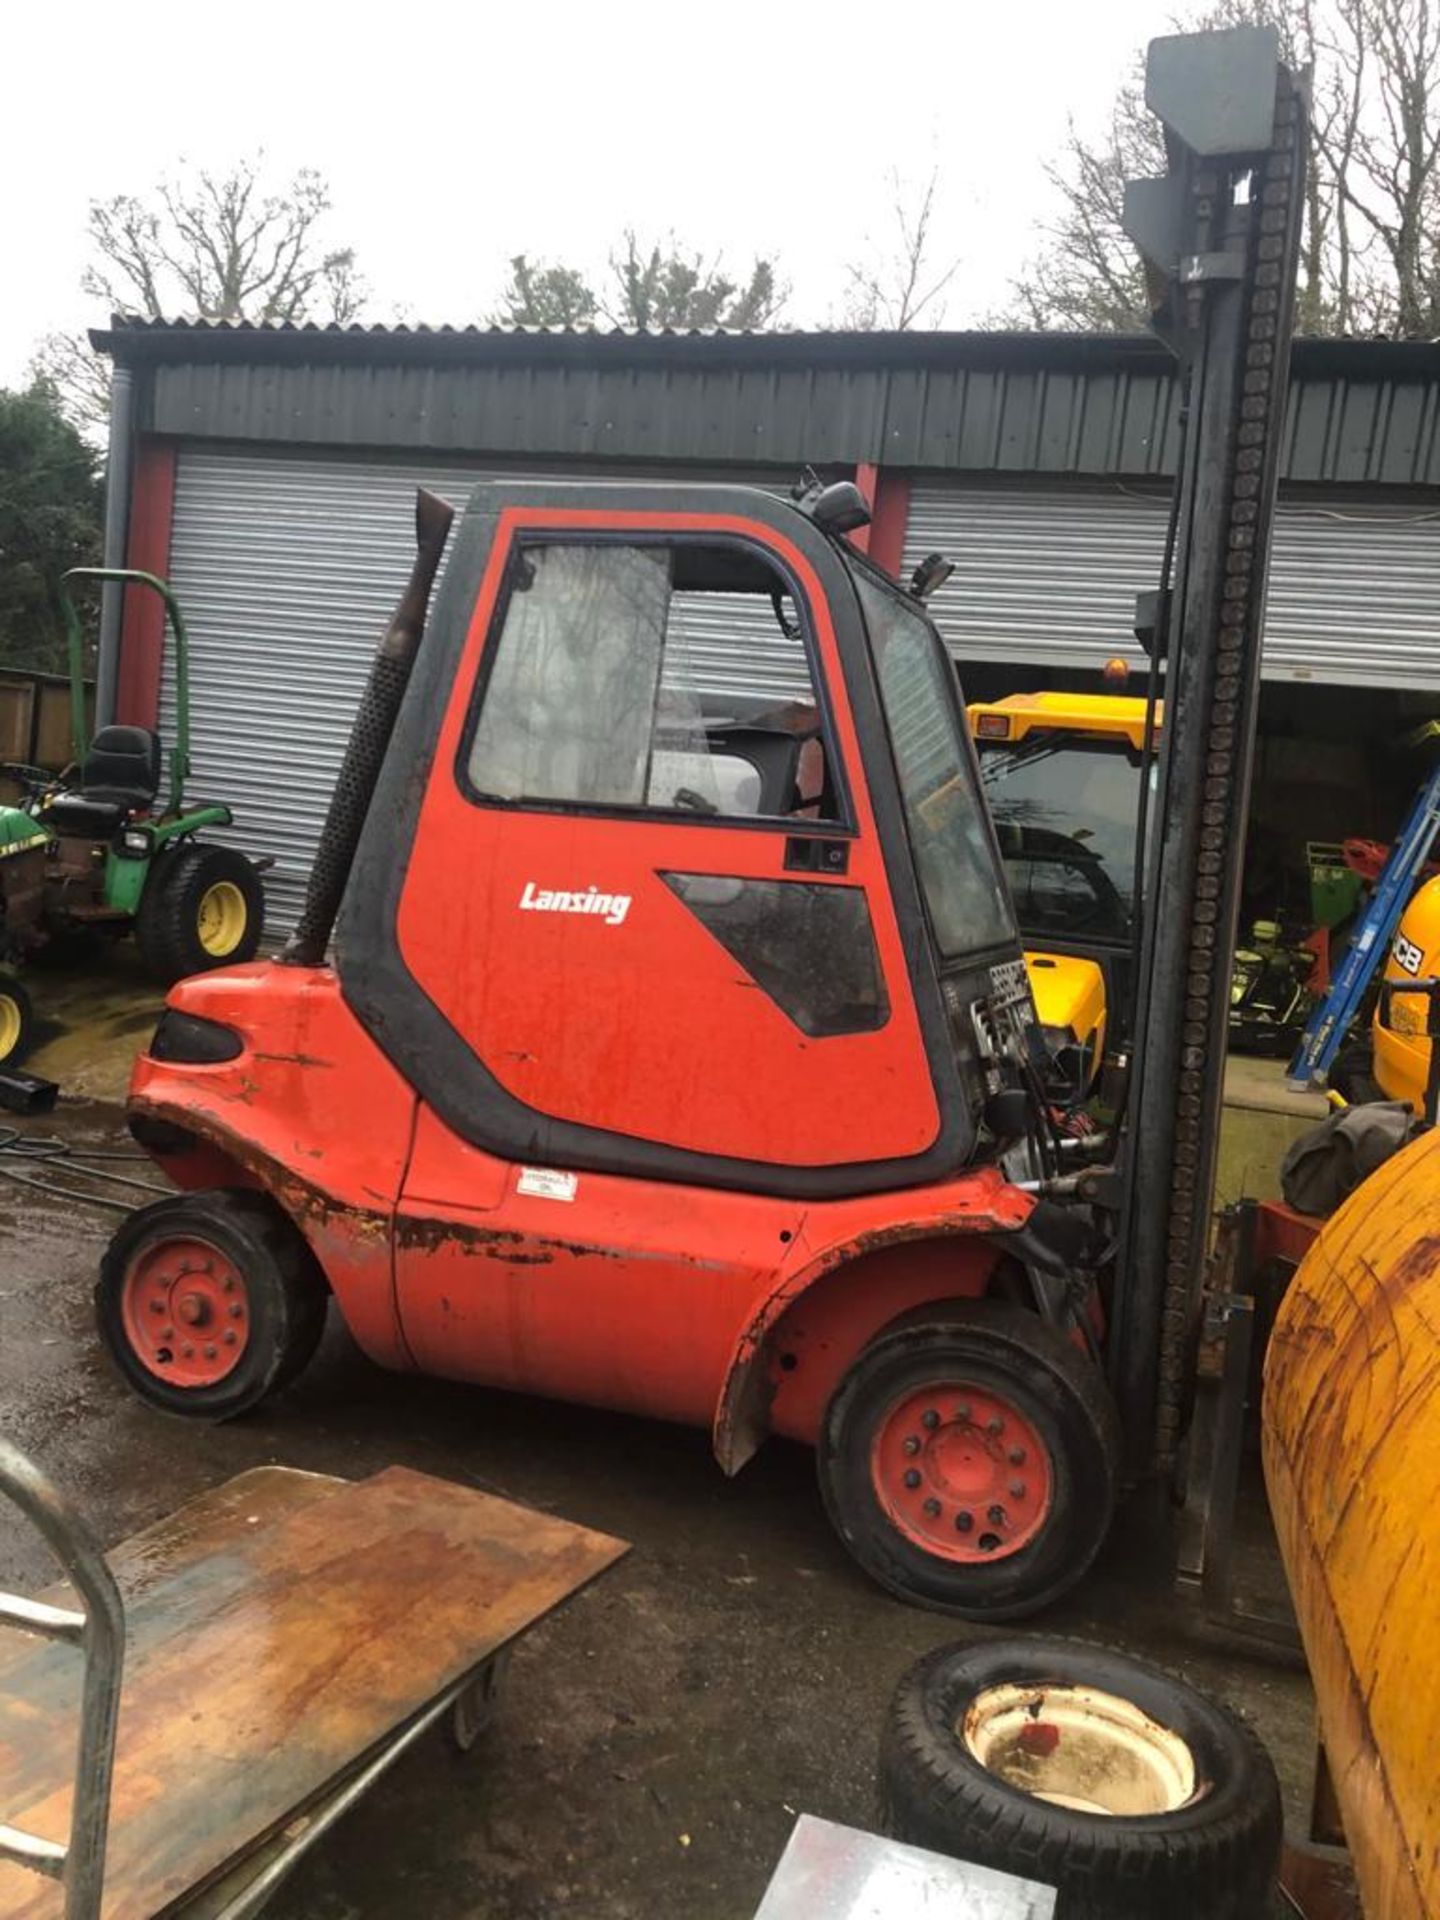 LINDE H40D DIESEL FORKLIFT TRUCK YEAR 1989 SN:352907010940 4 TONNE RATED WITH CAB AND 1 METRE LONG F